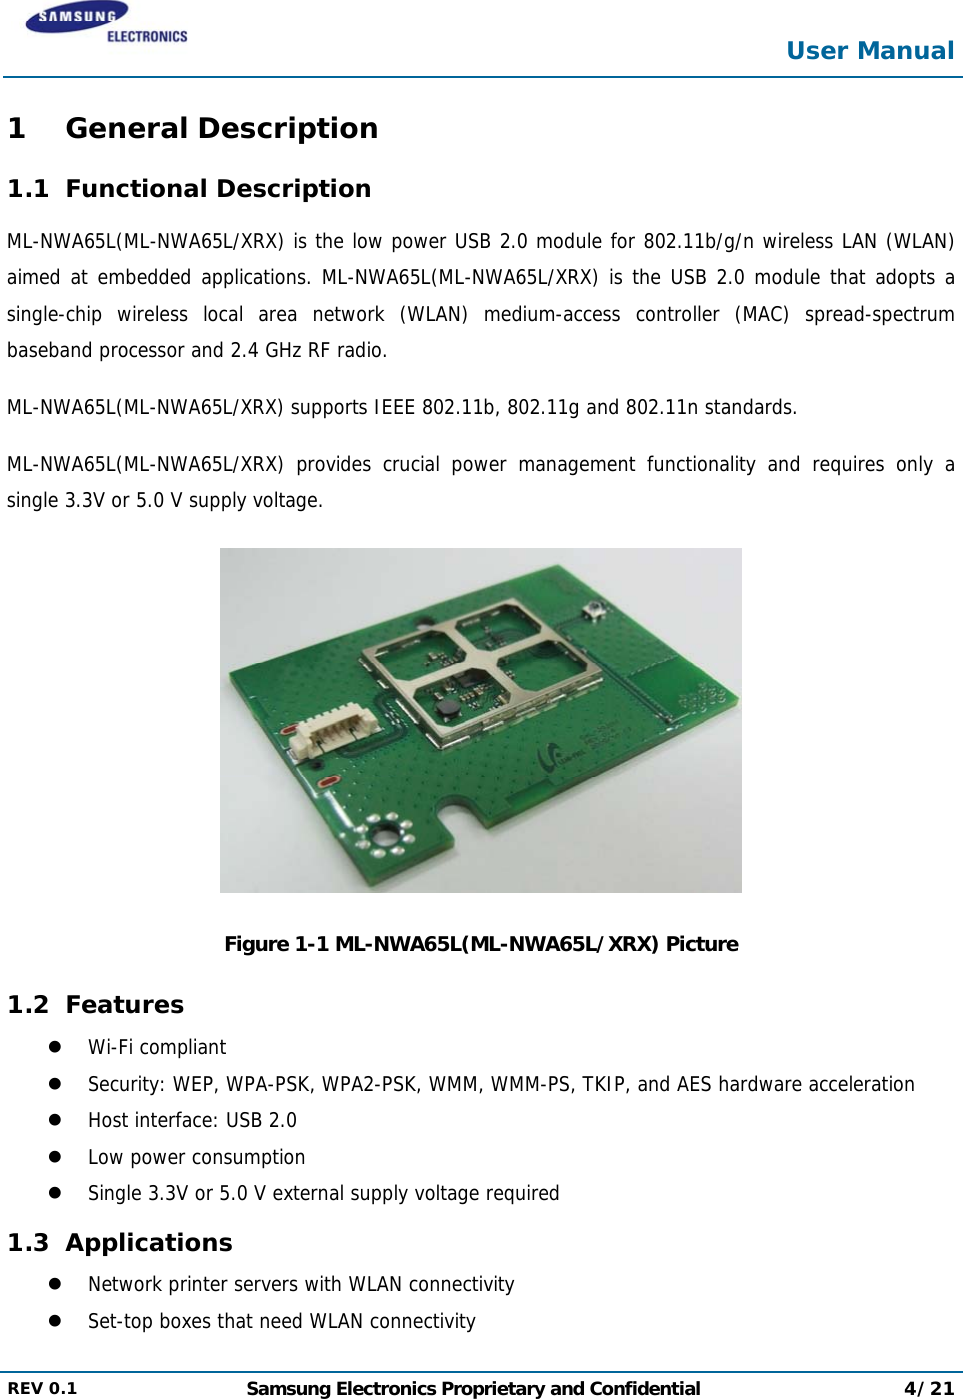  User Manual  REV 0.1  Samsung Electronics Proprietary and Confidential 4/21  1 General Description 1.1 Functional Description ML-NWA65L(ML-NWA65L/XRX) is the low power USB 2.0 module for 802.11b/g/n wireless LAN (WLAN) aimed at embedded applications. ML-NWA65L(ML-NWA65L/XRX) is the USB 2.0 module that adopts a single-chip wireless local area network (WLAN) medium-access controller (MAC) spread-spectrum baseband processor and 2.4 GHz RF radio. ML-NWA65L(ML-NWA65L/XRX) supports IEEE 802.11b, 802.11g and 802.11n standards. ML-NWA65L(ML-NWA65L/XRX) provides crucial power management functionality and requires only a single 3.3V or 5.0 V supply voltage.  Figure 1-1 ML-NWA65L(ML-NWA65L/XRX) Picture 1.2 Features  Wi-Fi compliant  Security: WEP, WPA-PSK, WPA2-PSK, WMM, WMM-PS, TKIP, and AES hardware acceleration  Host interface: USB 2.0   Low power consumption  Single 3.3V or 5.0 V external supply voltage required 1.3 Applications  Network printer servers with WLAN connectivity  Set-top boxes that need WLAN connectivity 